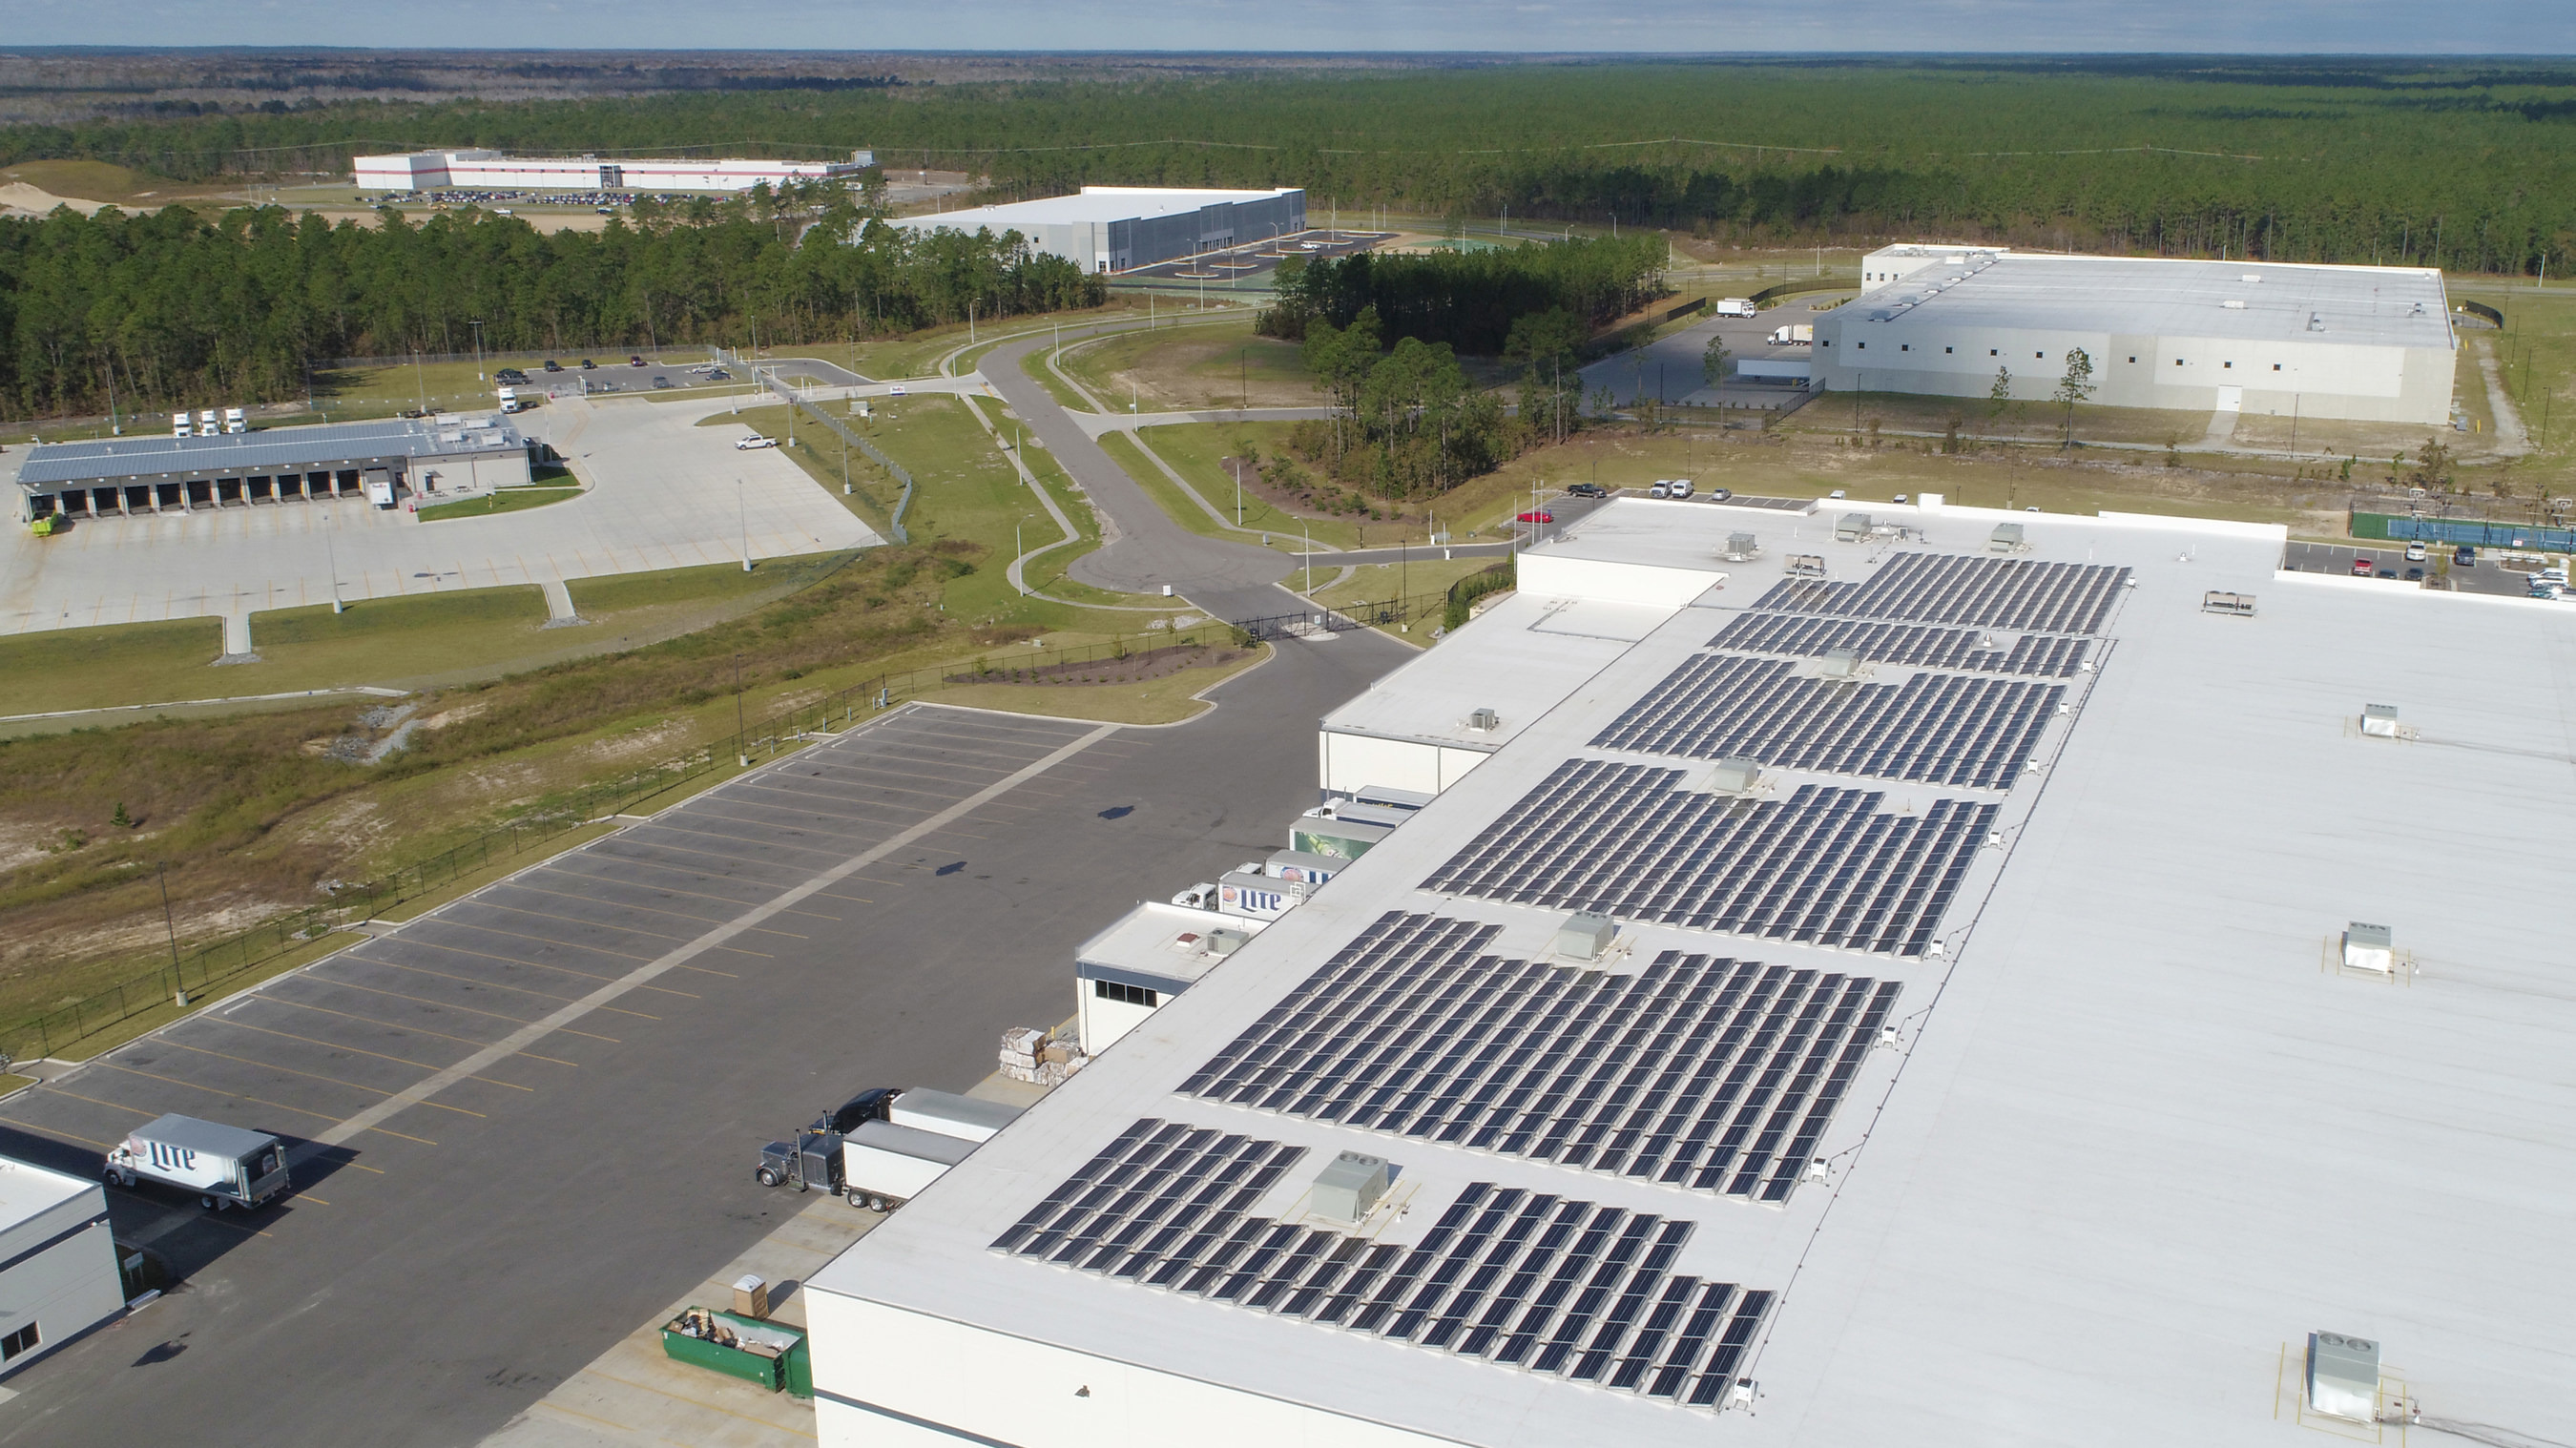 Aerial view of Coastal Beverage Company’s solar panels installed by Cape Fear Solar Systems.